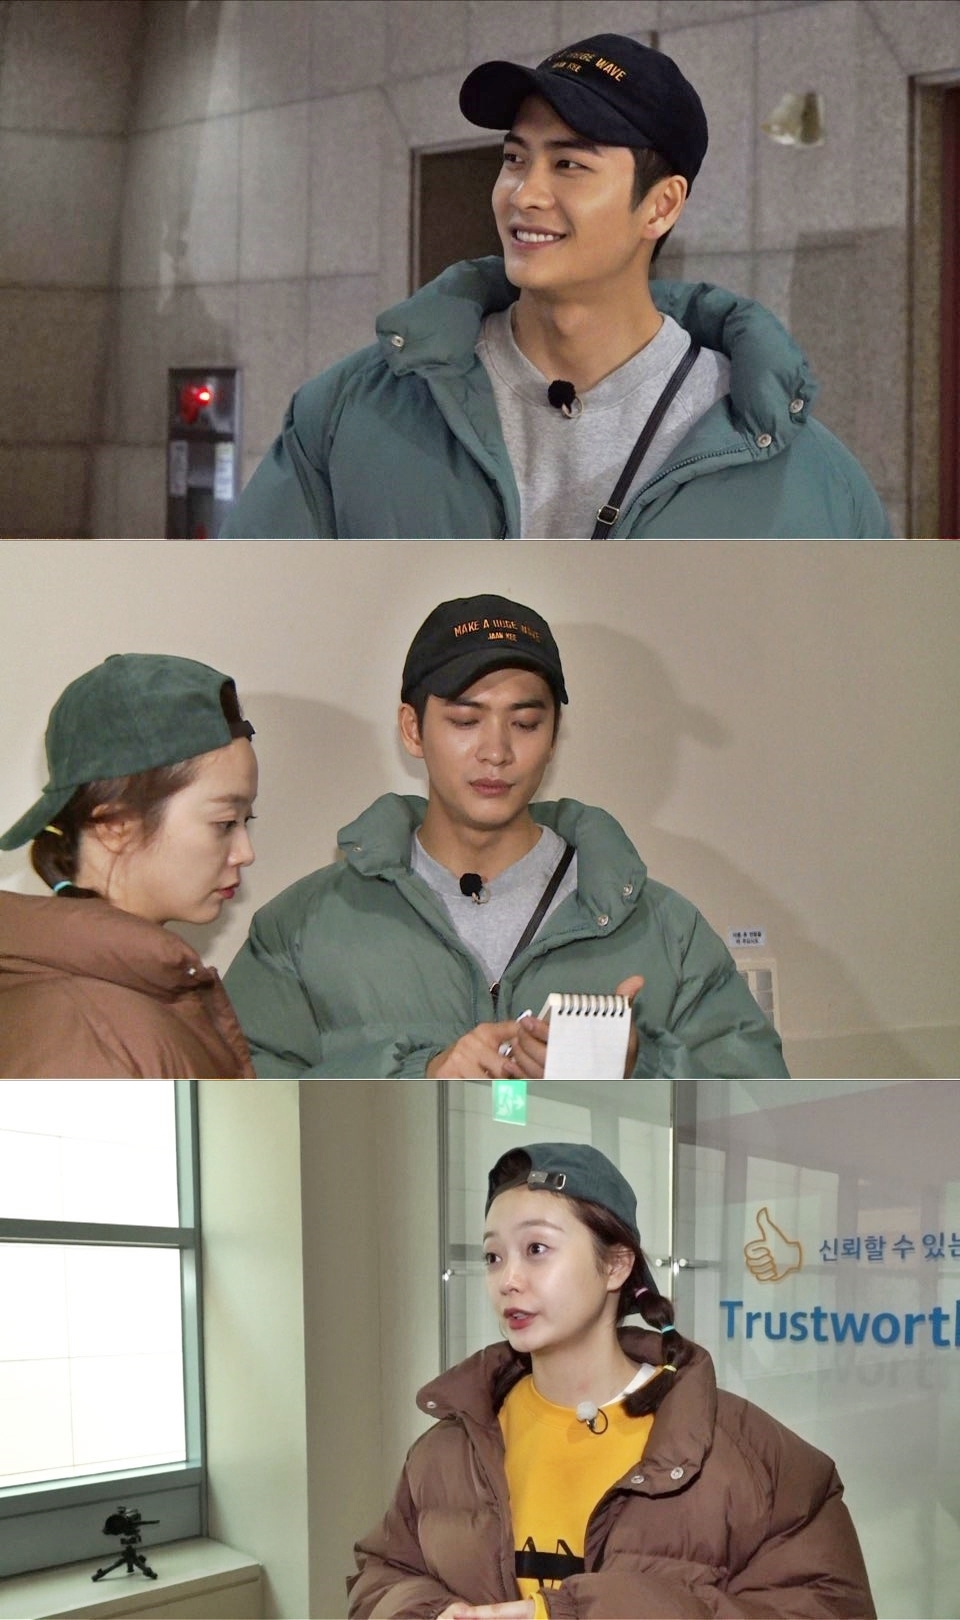 Seoul = = Running Man Kang Tae-oh delivers point blank Confessions to Jeon So-min.On SBS Running Man, which will be broadcasted on the 5th, the final race of Kangan Film Festival following last weeks broadcast will be held to find the national actor and director.Among them, Kang Tae-oh suddenly confessions in the absence of members, saying I originally liked it to Jeon So-min, and makes Jeon So-min thrill.During the race, the two people who were together in a space continued the conversation as if they were awkward, and Kang Tae-oh said, I did not tell you that it was burdensome.So, Jeon So-min could not hide his joy, and soon asked again, Have you seen my Yondu makeup? Kang Tae-oh said, I have seen all the Yondu makeup.The reason for the strange airflow between Jeon So-min and Kang Tae-oh can be found in Running Man which is broadcasted at 5 pm on the day.